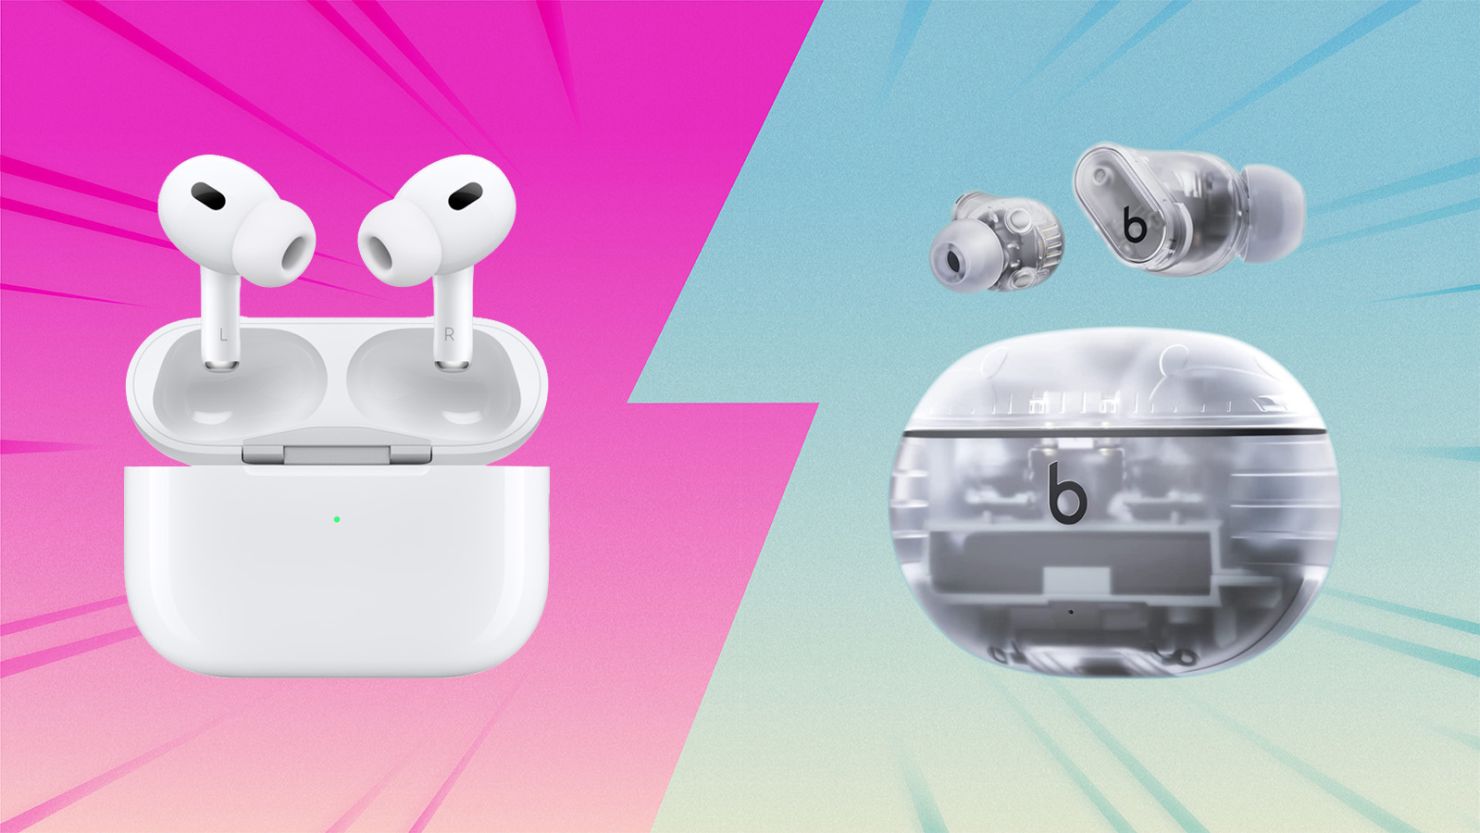 Apple AirPods 2 vs AirPods Pro: which Apple earbuds are better